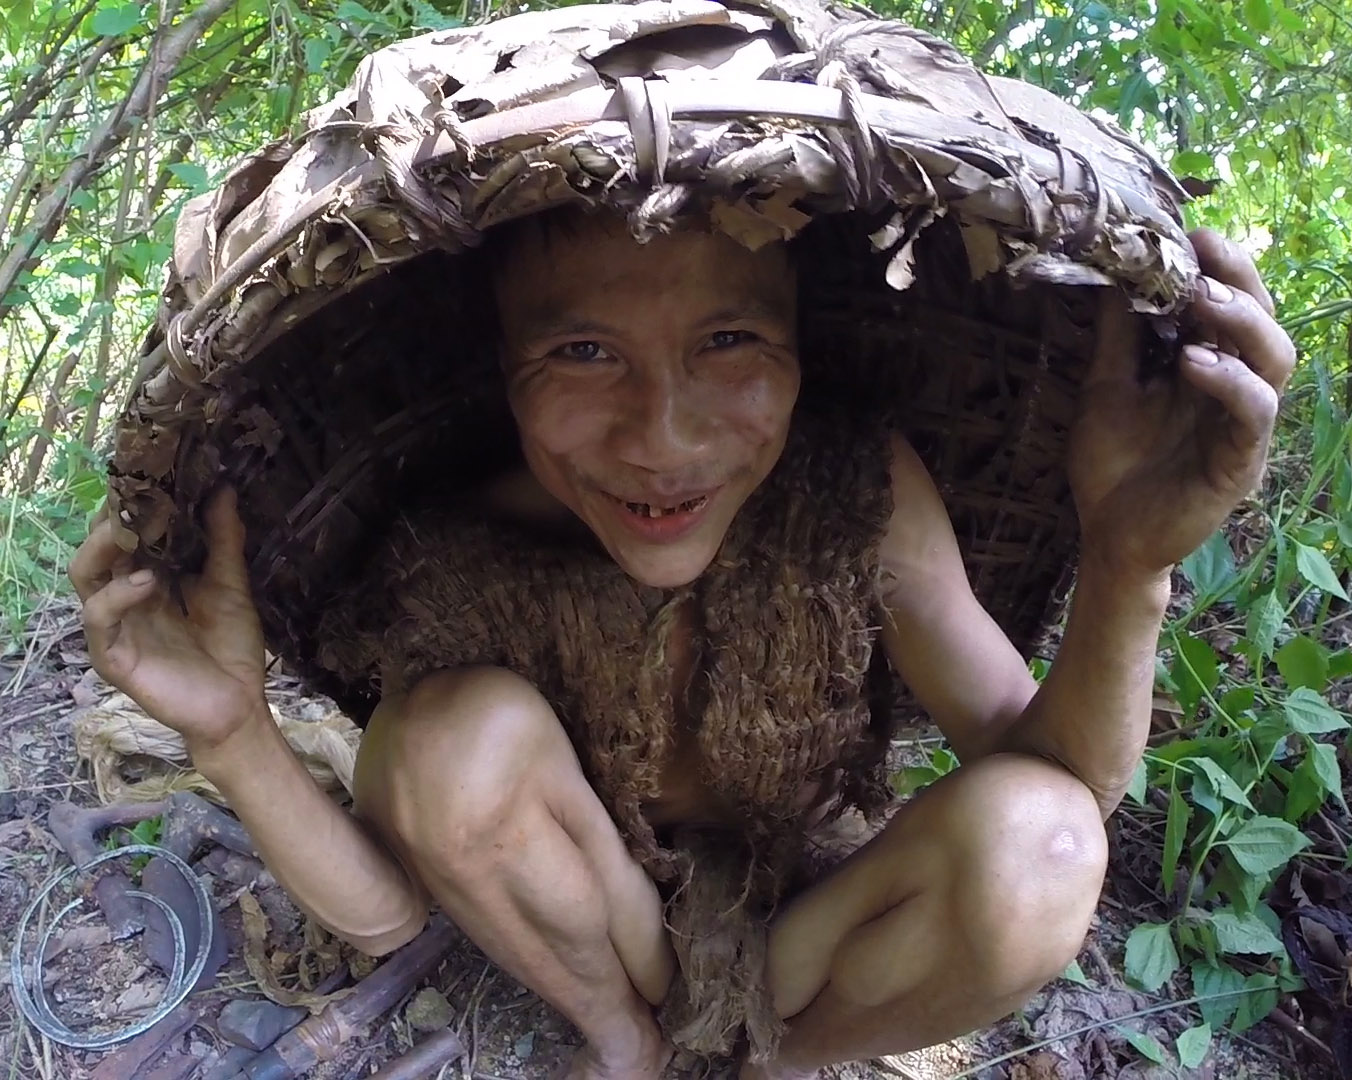 Vietnam jungle men: Incredible story of Ho Van Lang, the boy who lived in the wild for 41 years